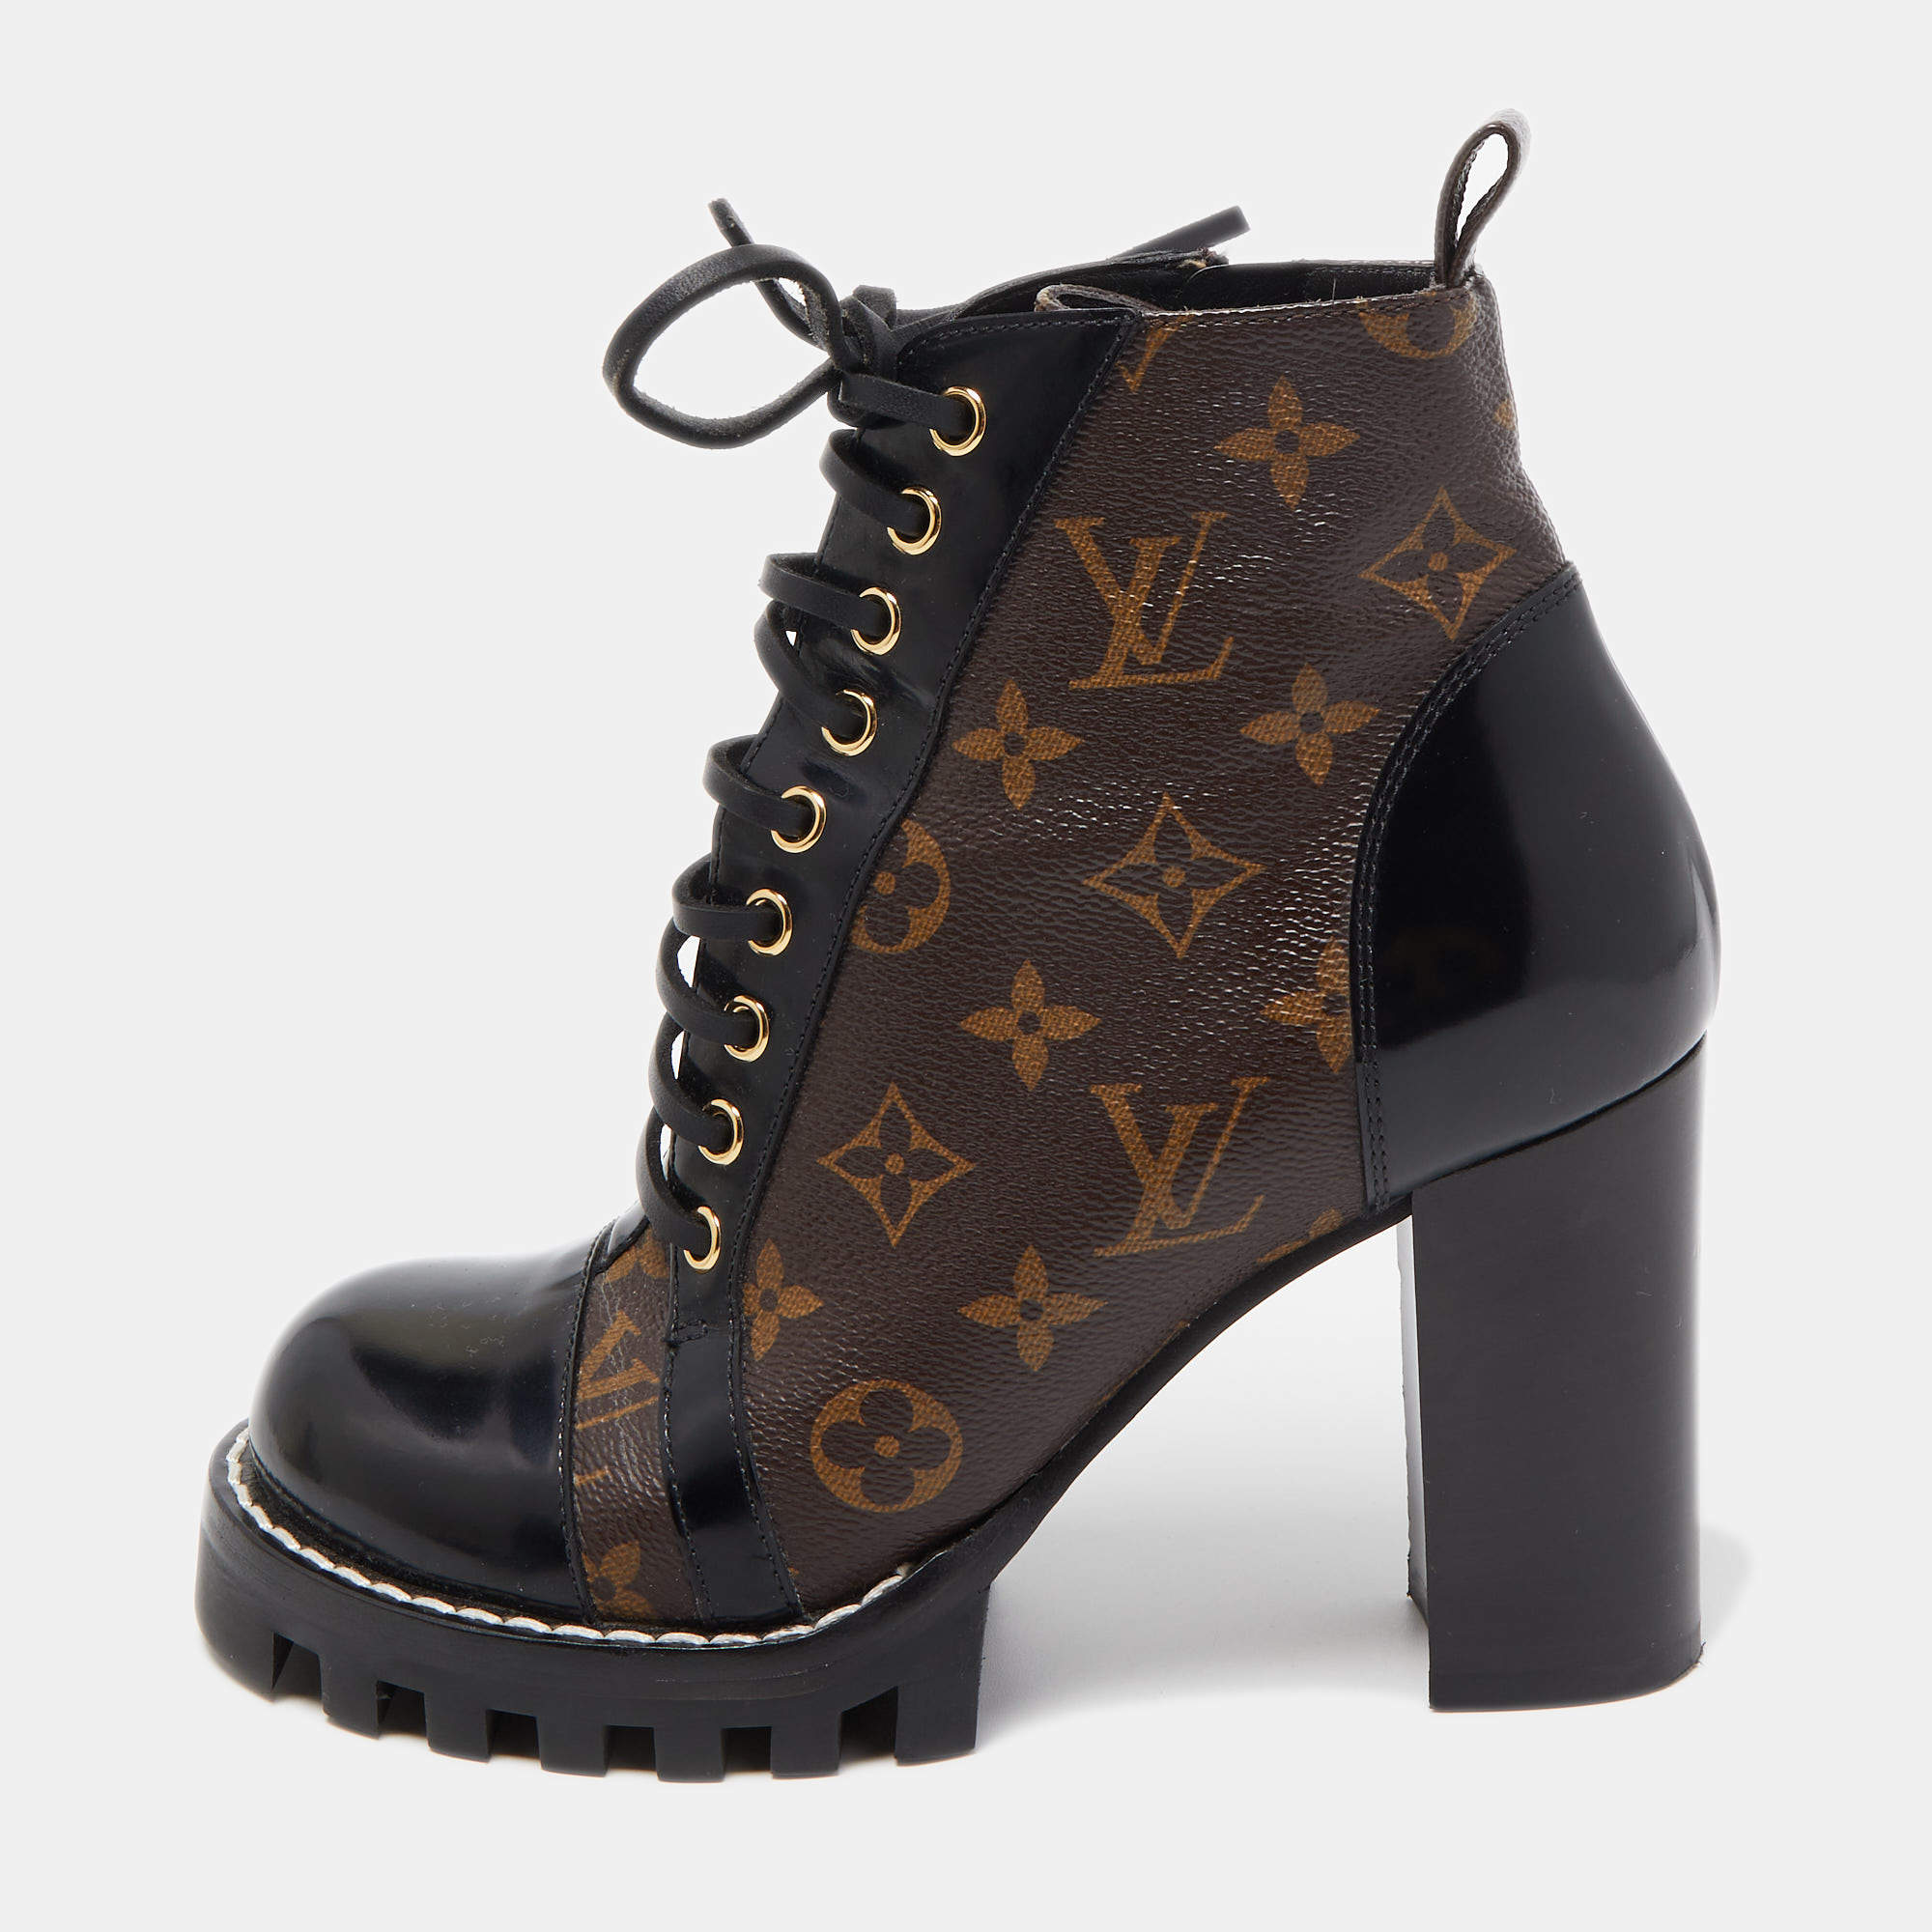 Louis Vuitton Monogram Star Trail Heel Boots, Size 40 with Box